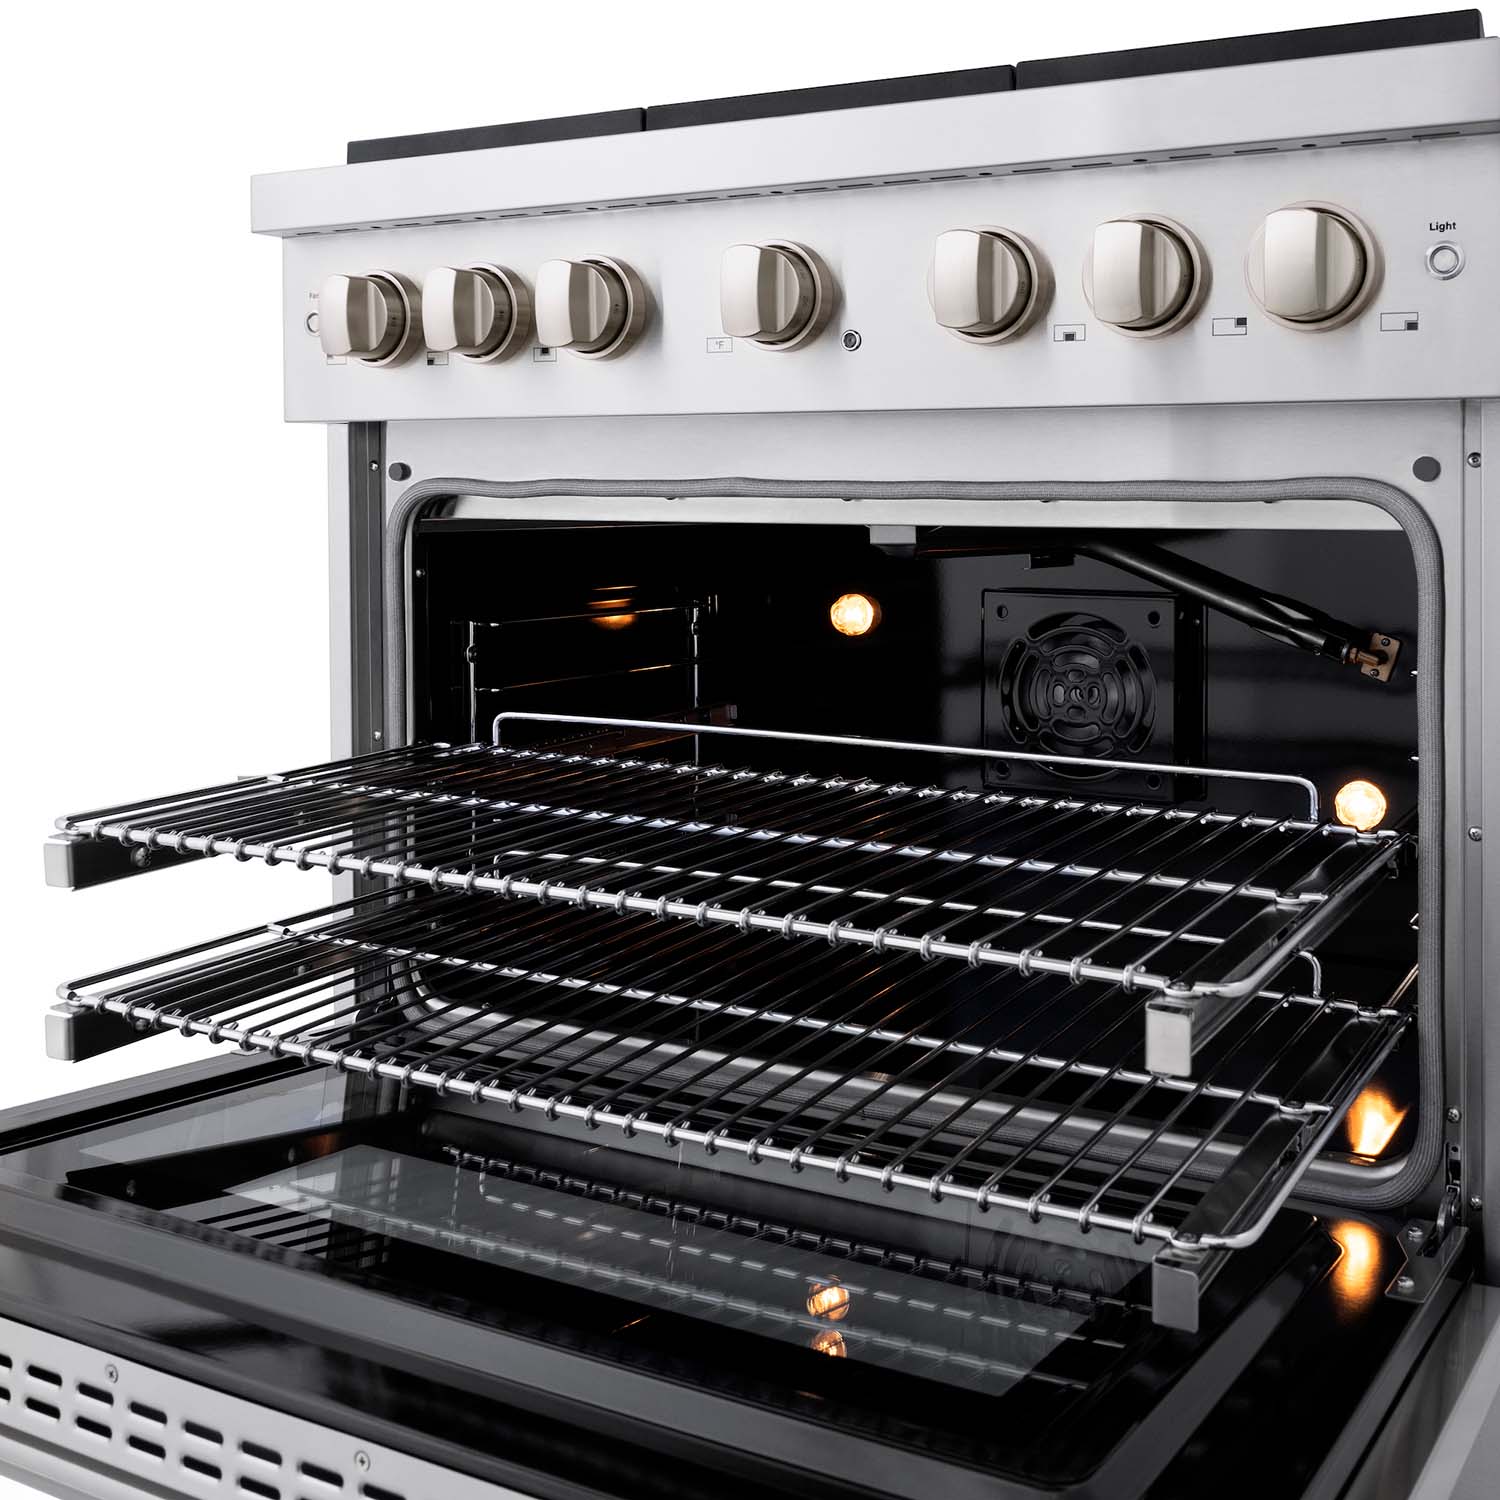 ZLINE 36 in. 5.2 cu. ft. 6 Burner Gas Range with Convection Gas Oven in Stainless Steel (SGR36) front, oven open with racks extended and lighting activated.